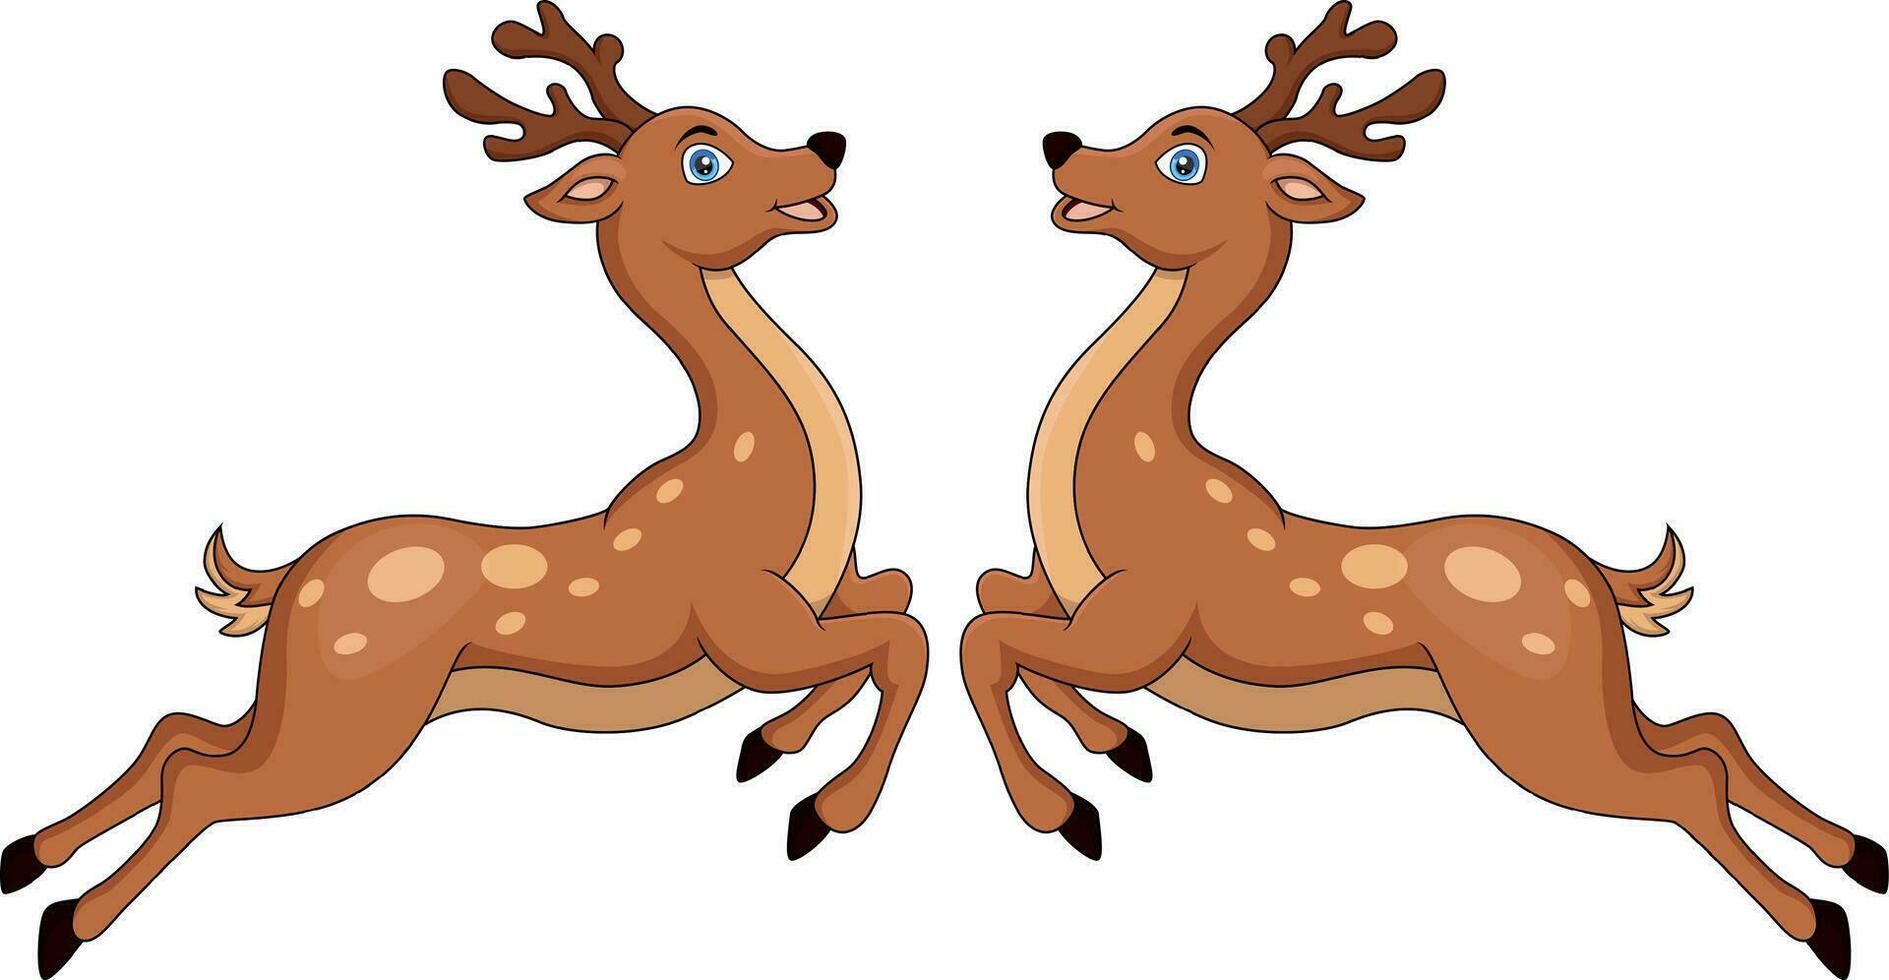 Cute two deers cartoon on white background vector